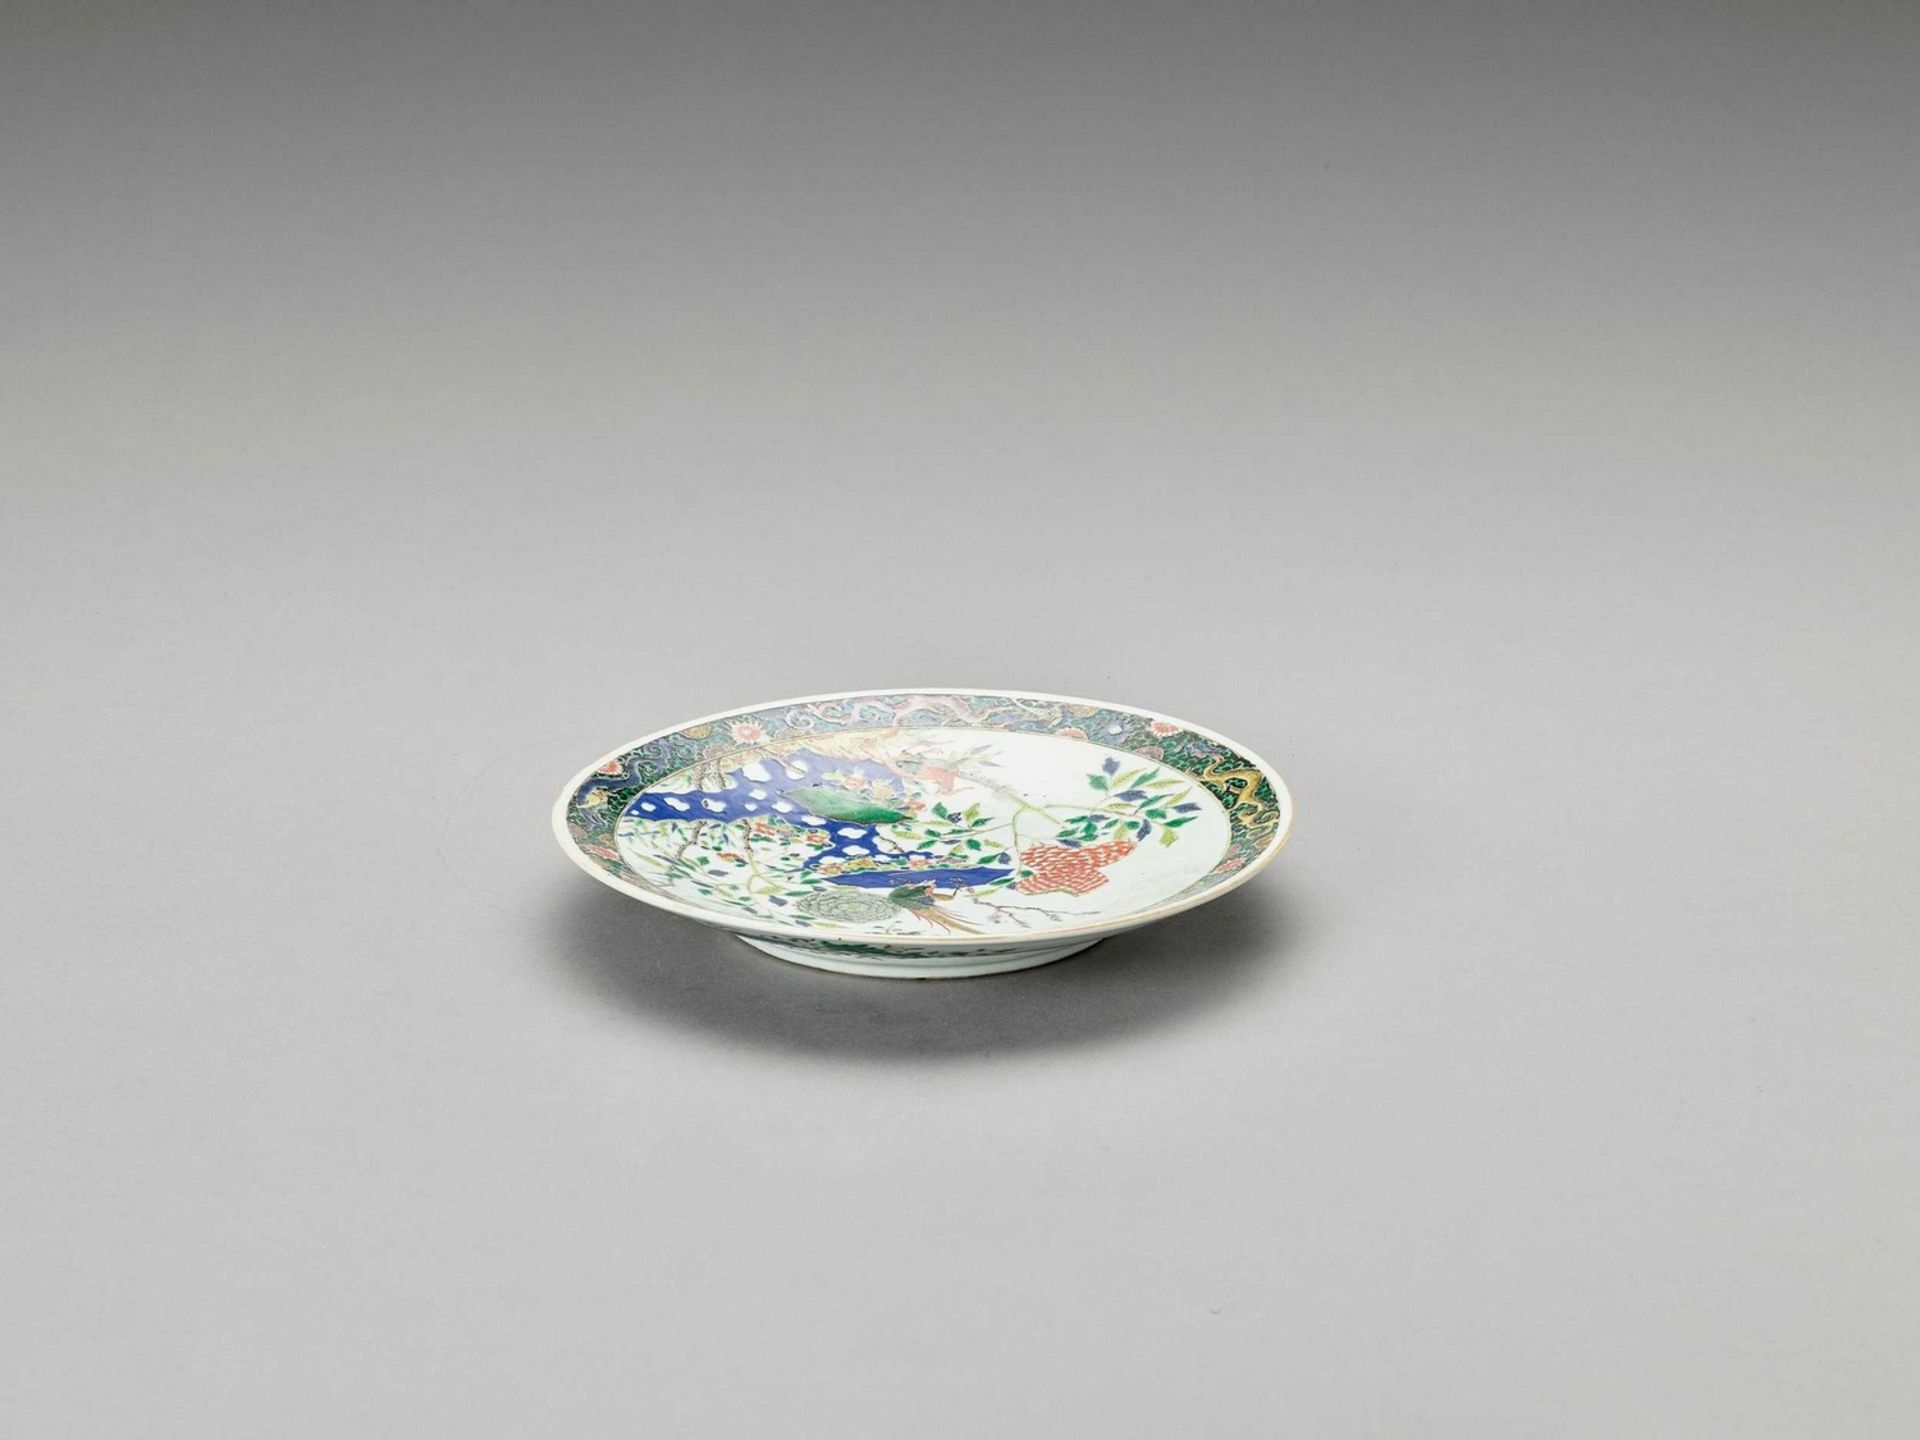 A FAMILLE VERTE PORCELAIN ‘BIRDS AND FLOWERS’ DISH, QING - Image 2 of 4